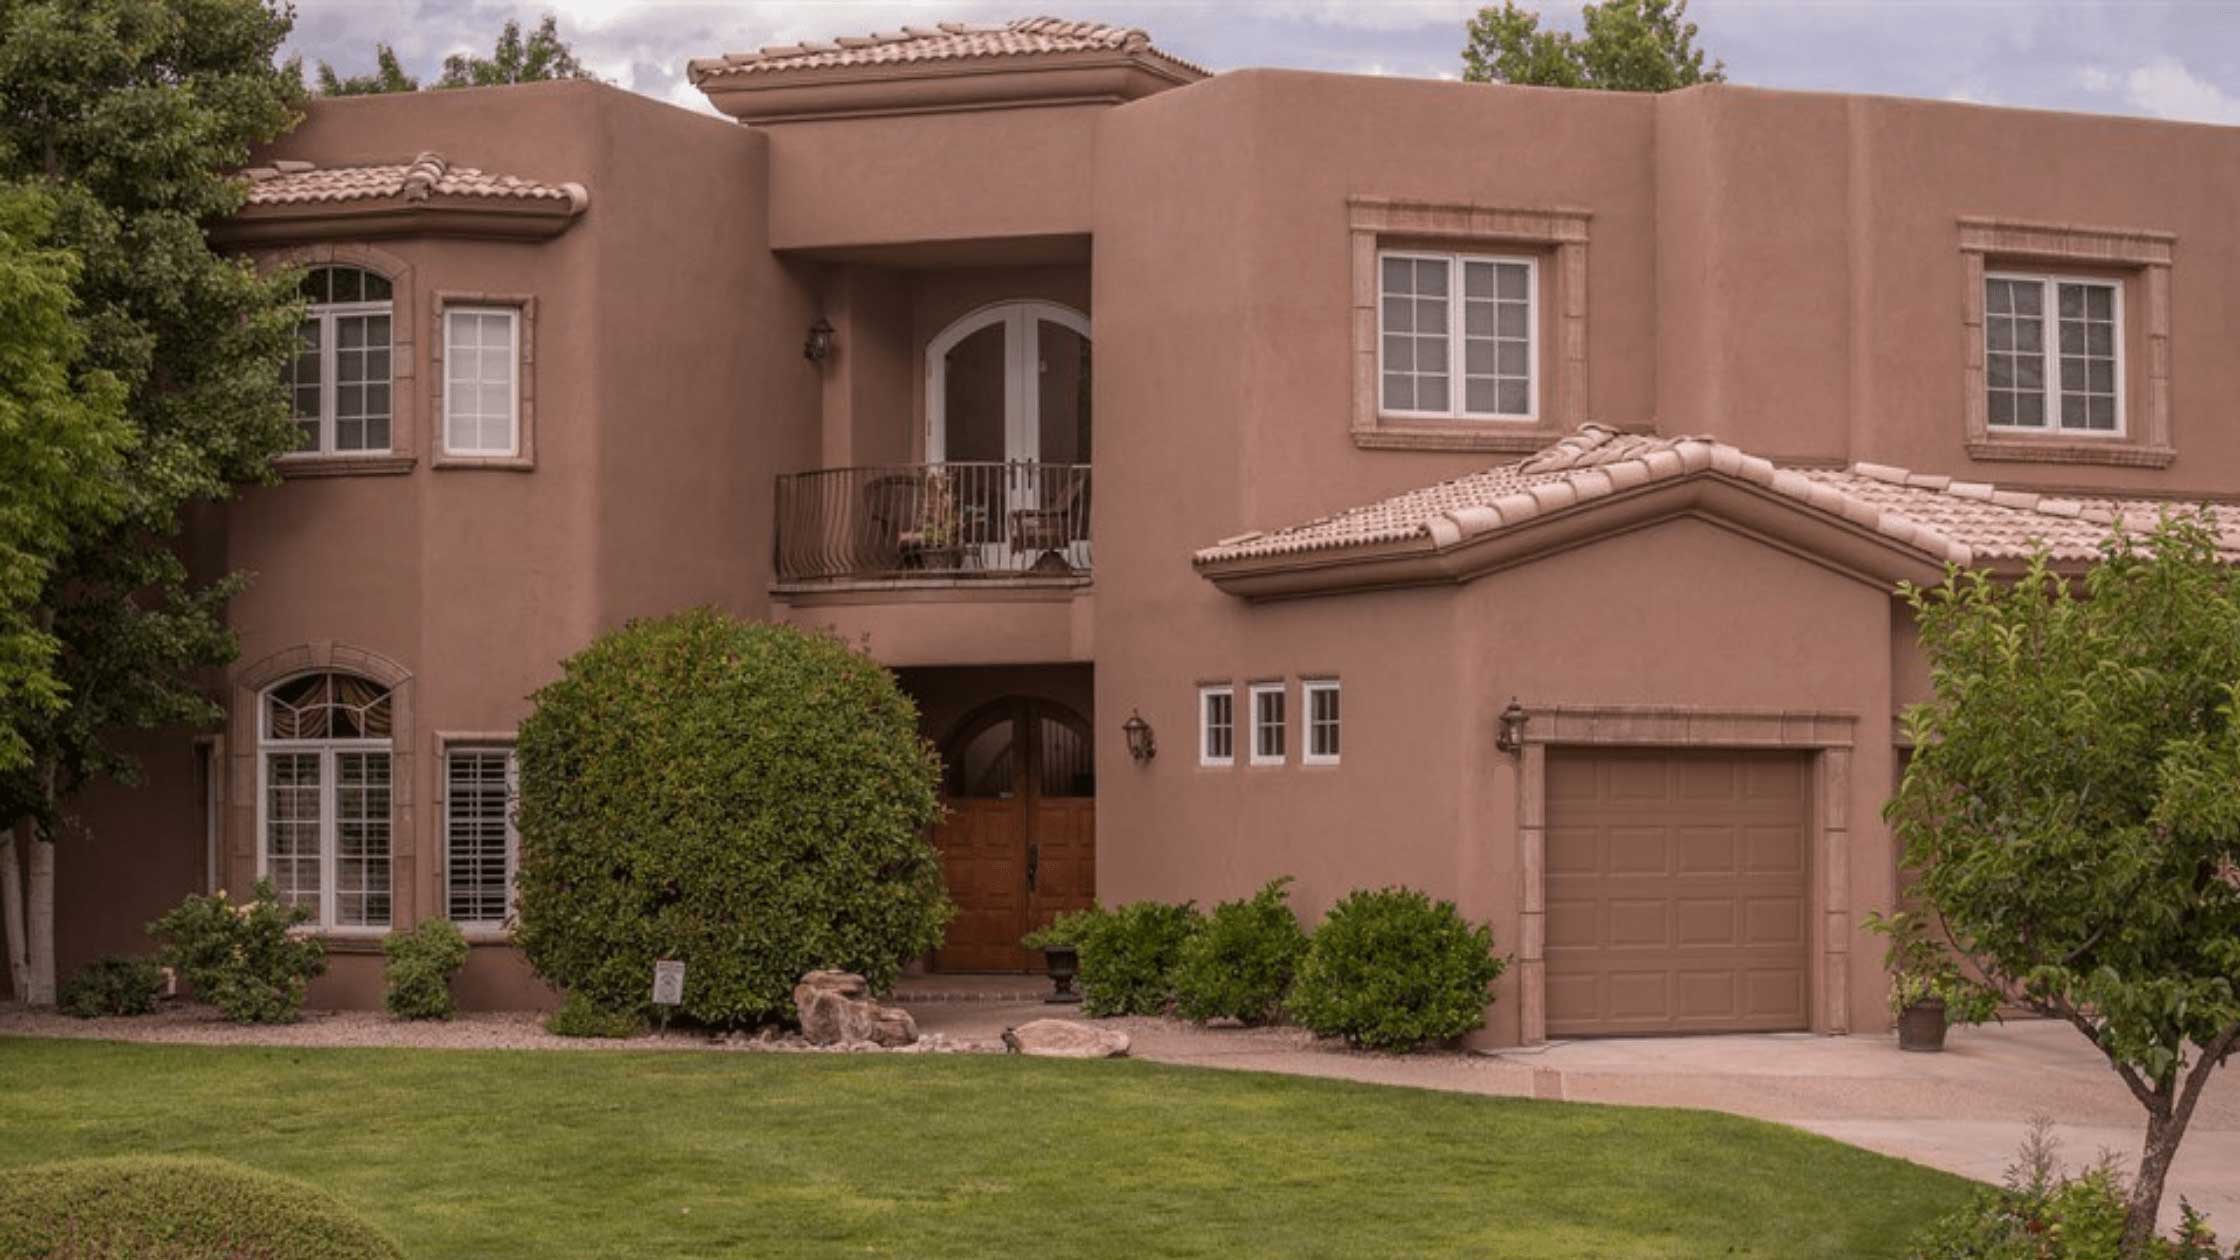 Large two story brown stucco house with green grass